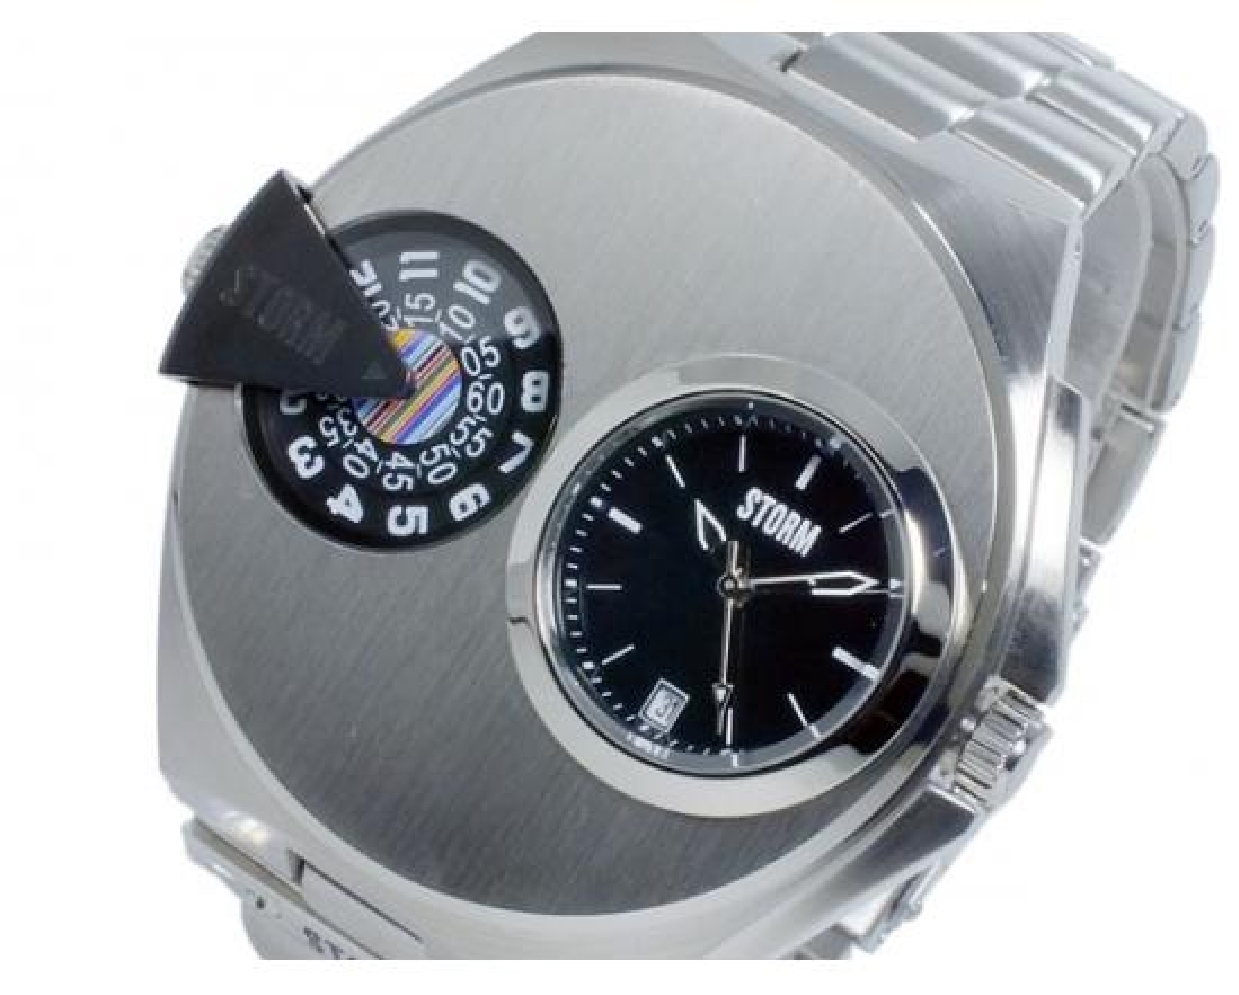 Dualmatic   Special Edition   STORM Watch in Bl...